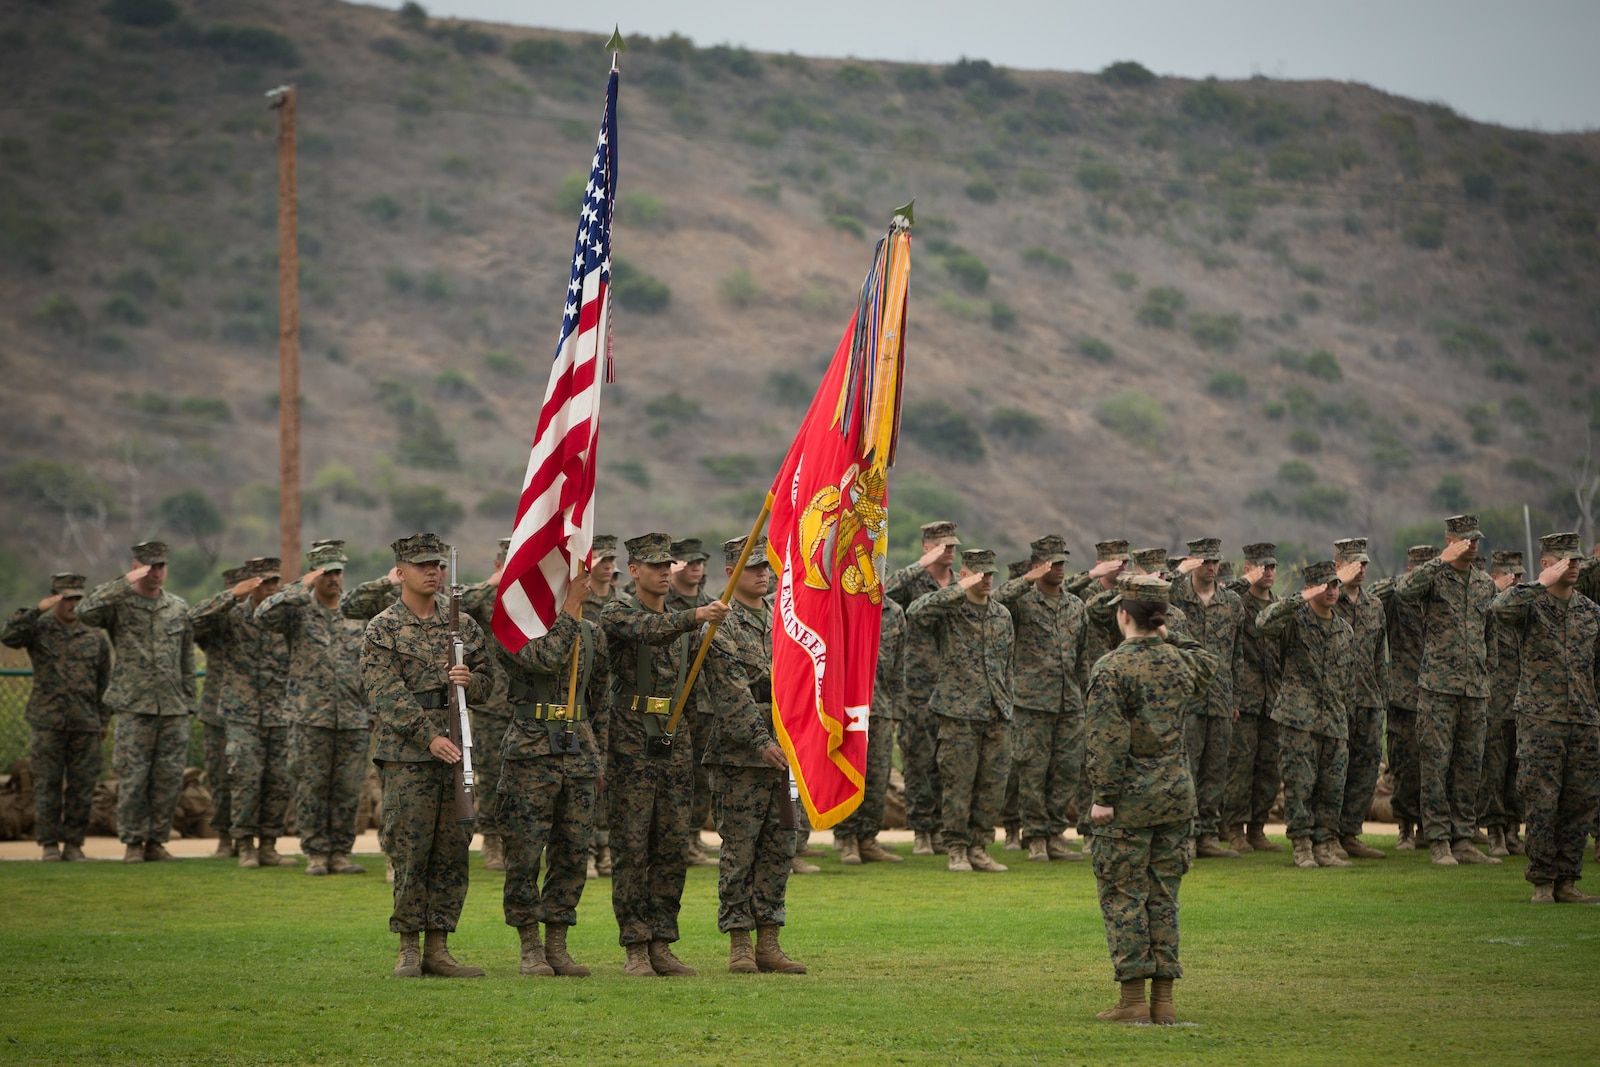 U.S. Marine Corps color guard with 1st Combat Engineer Battalion (CEB), 1st Marine Division, present the colors during a change of command ceremony at Marine Corps Base Camp Pendleton, Calif., June 22, 2018.